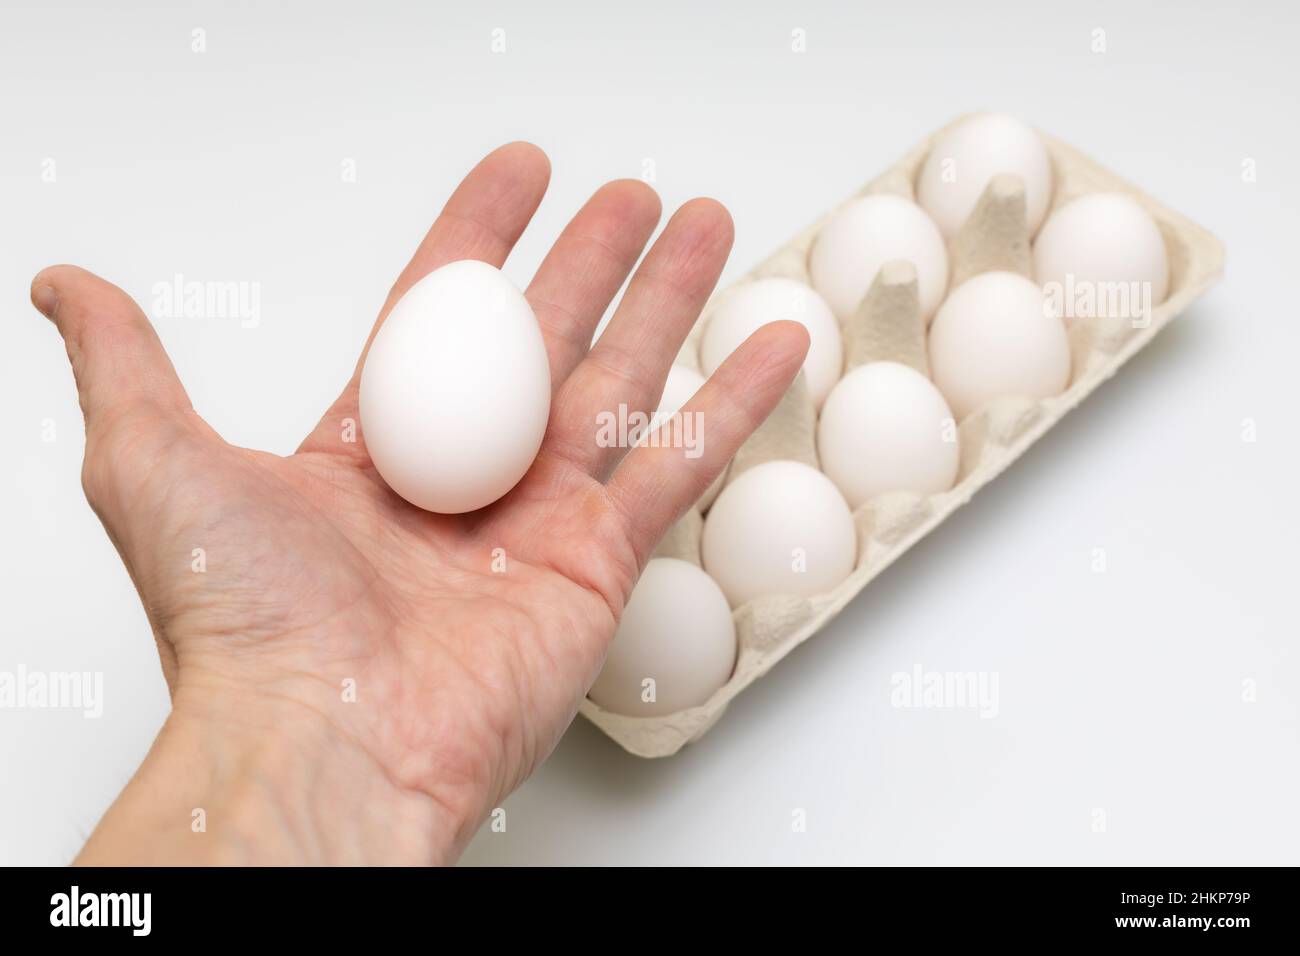 a hand holds an egg in the palm of a hand against a background of a dozen eggs Stock Photo